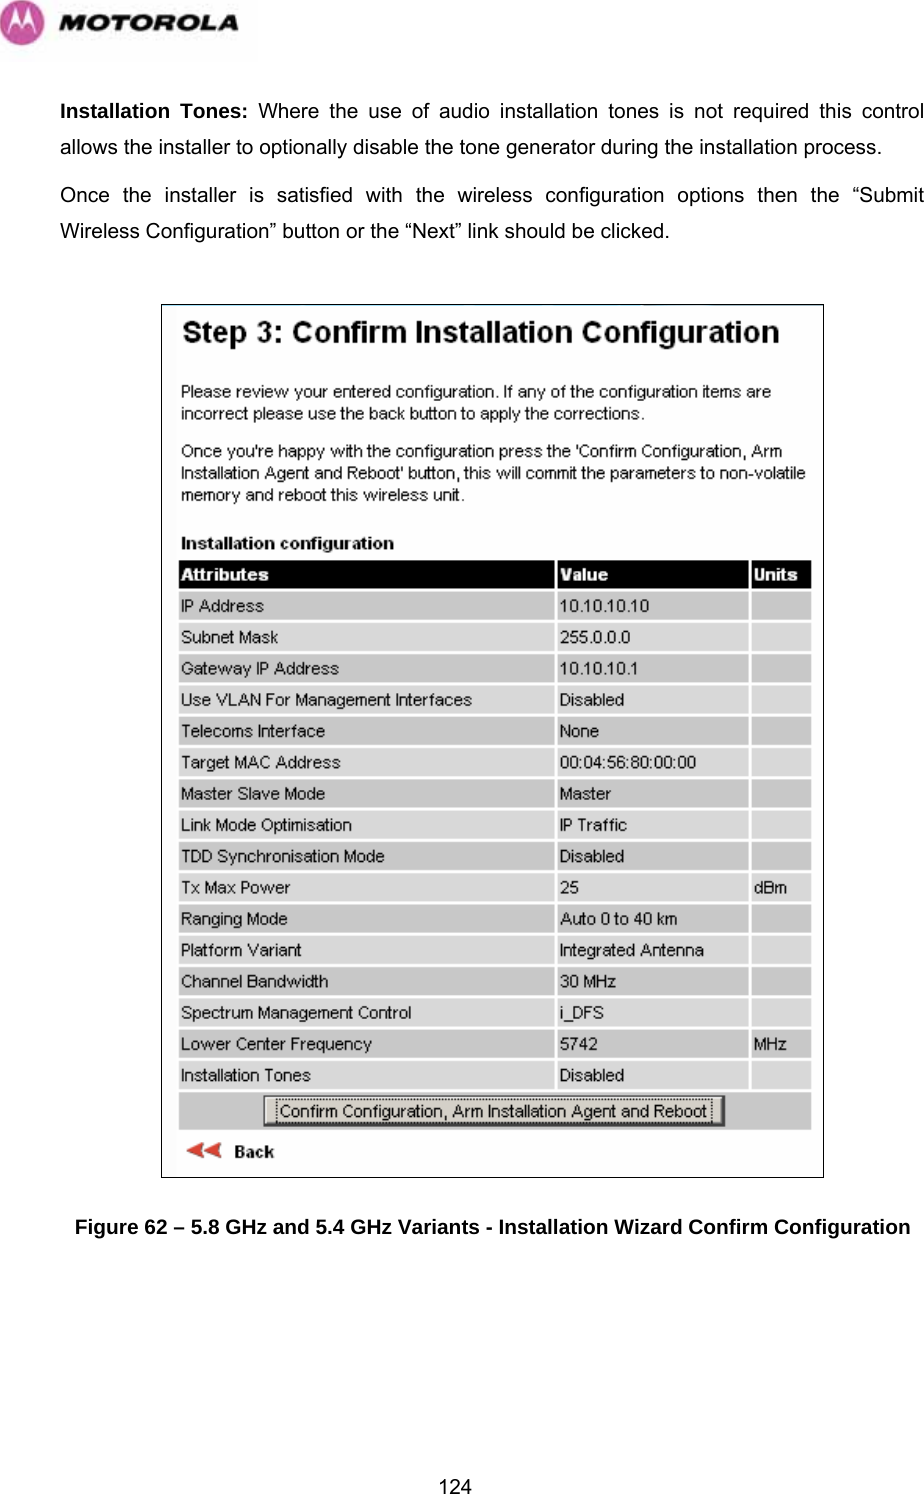   124Installation Tones: Where the use of audio installation tones is not required this control allows the installer to optionally disable the tone generator during the installation process. Once the installer is satisfied with the wireless configuration options then the “Submit Wireless Configuration” button or the “Next” link should be clicked.   Figure 62 – 5.8 GHz and 5.4 GHz Variants - Installation Wizard Confirm Configuration  